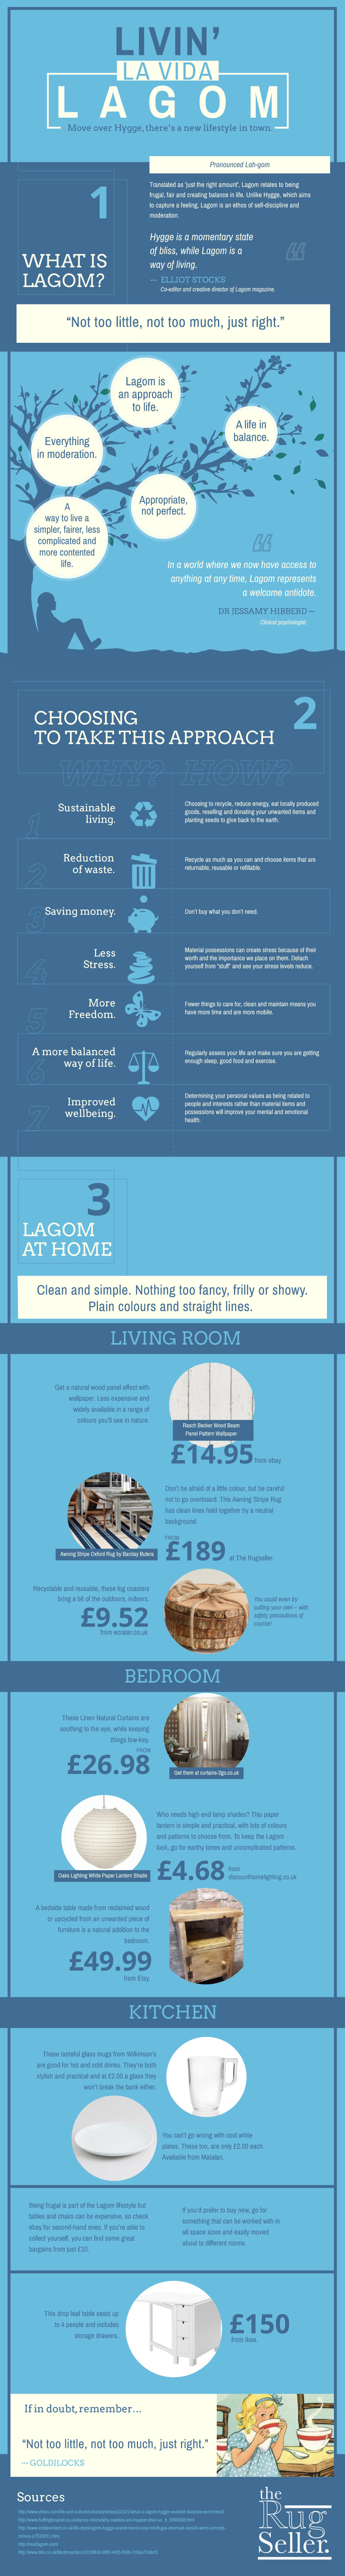 Discover How to Live the Lagom Lifestyle